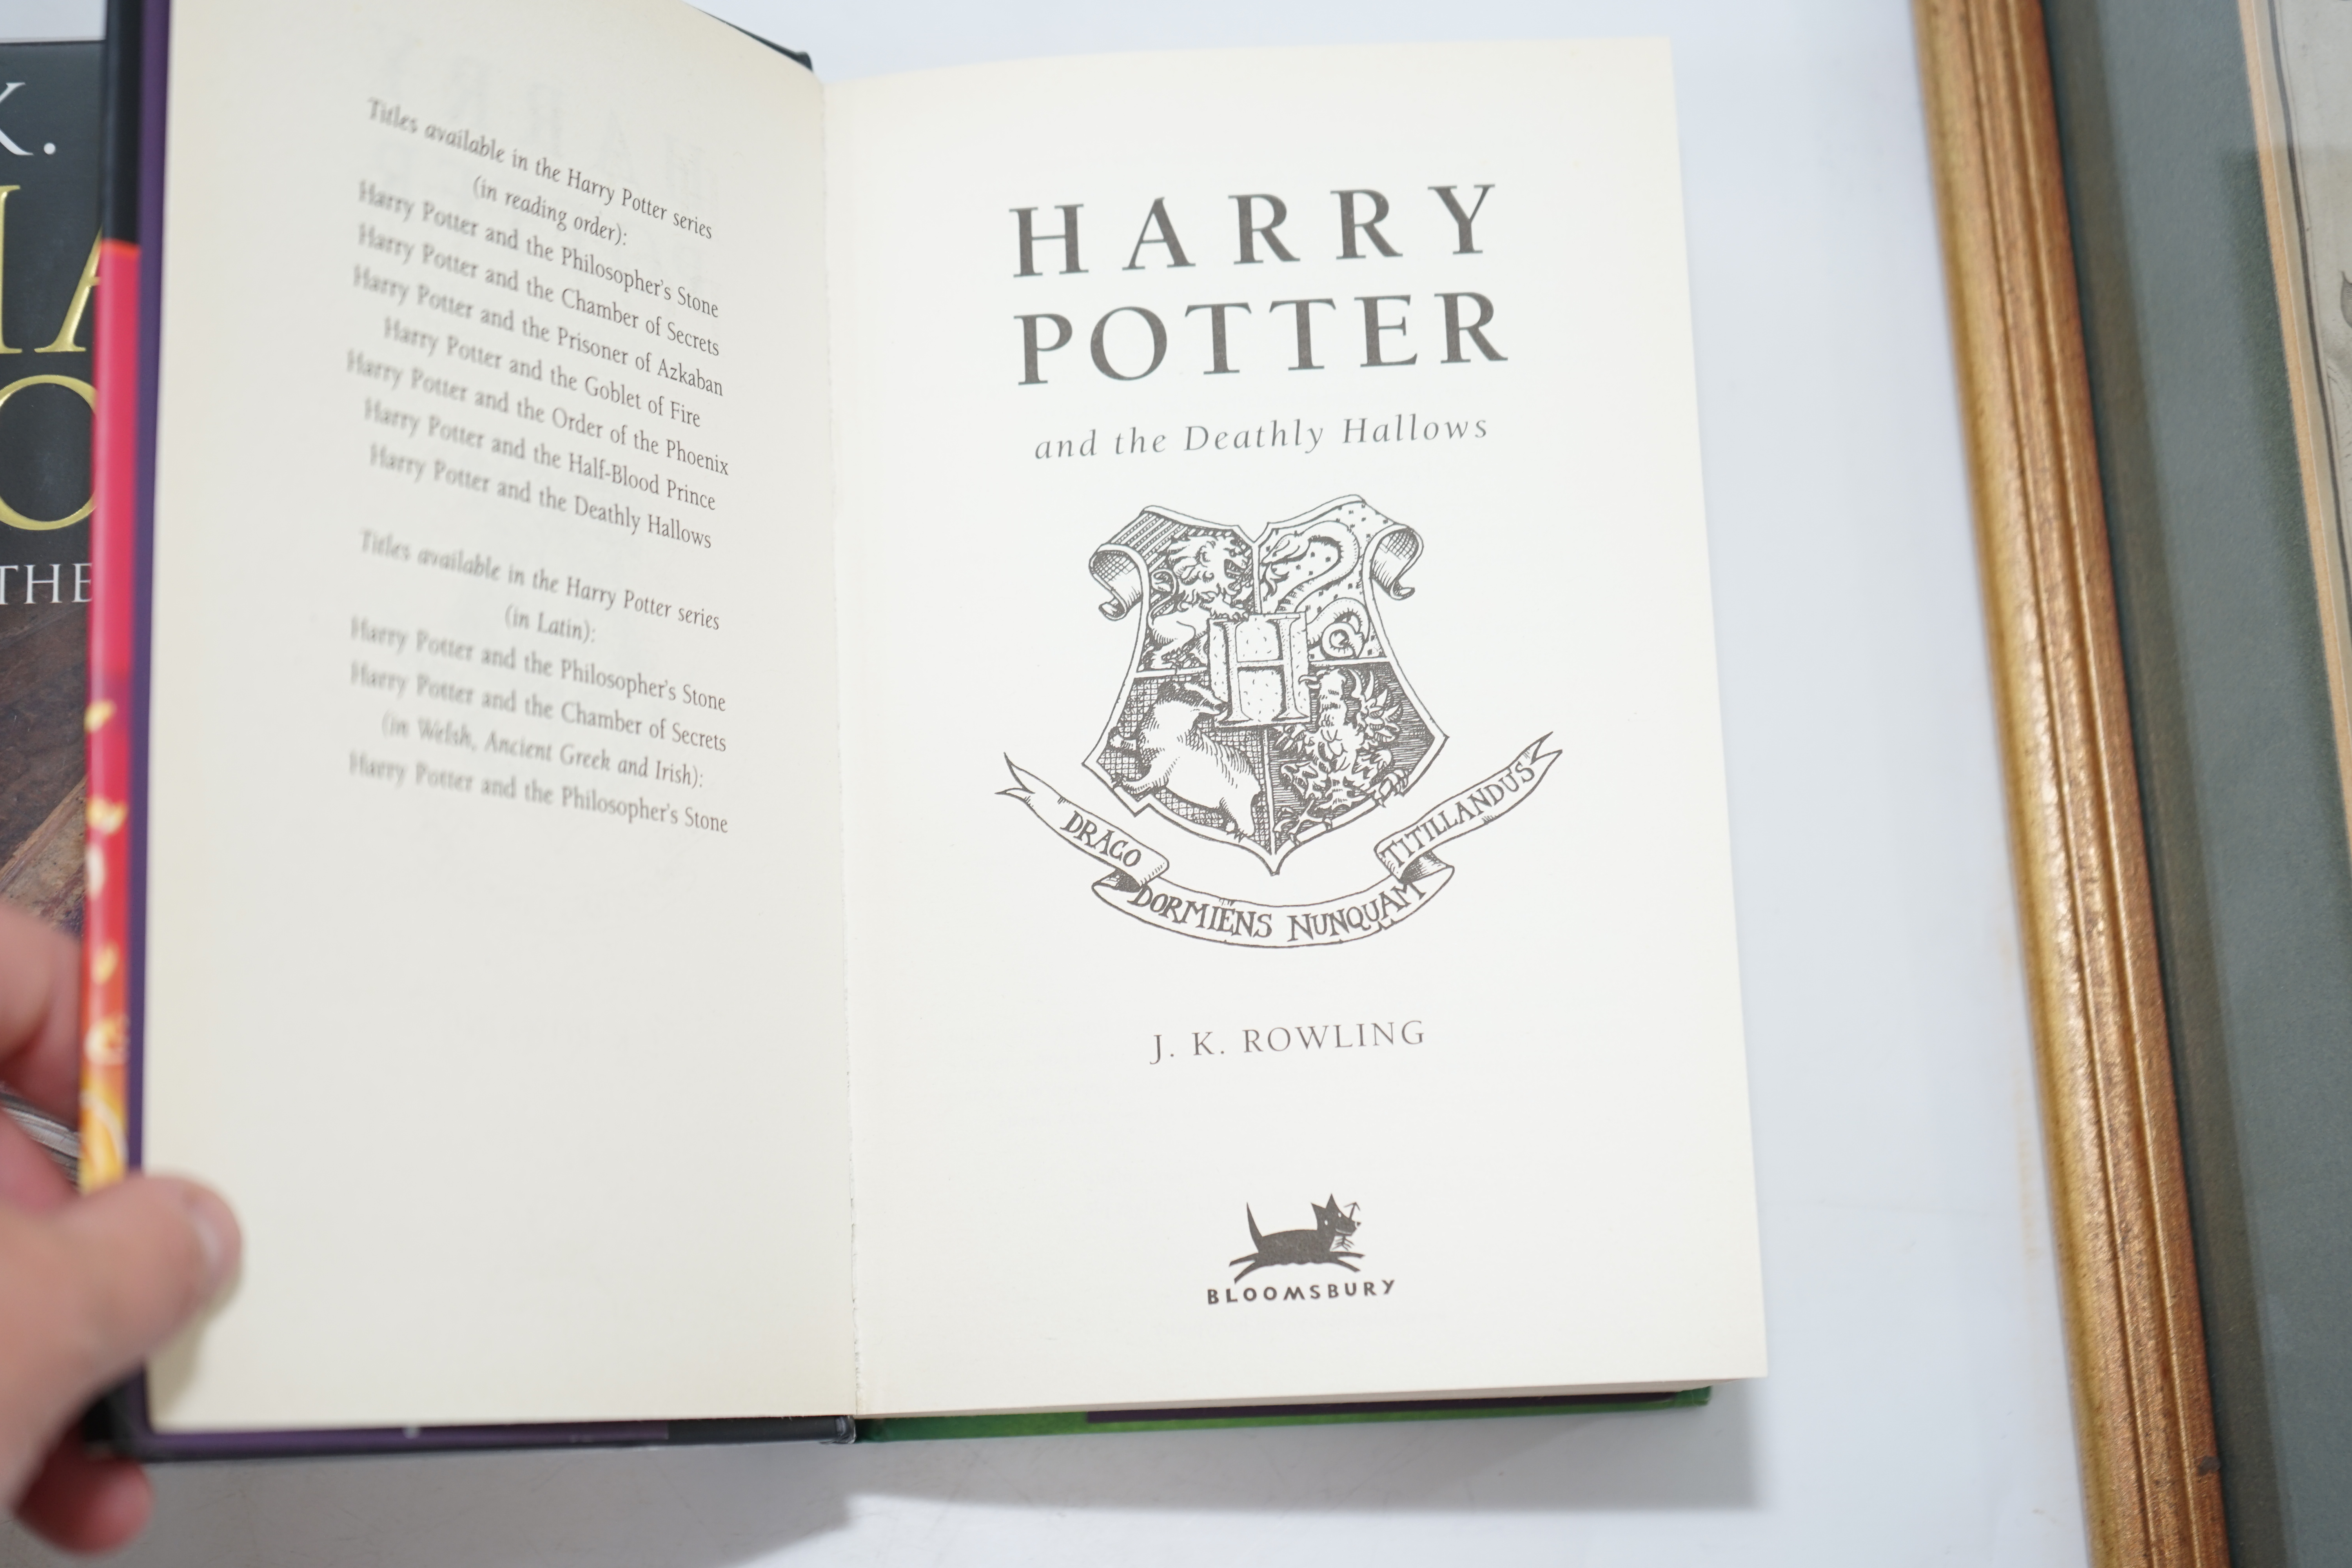 Rowling, J.K - Three works - Harry Potter and the Order of the Phoenix, 1st edition, a misbound copy - The Hogwarts High Inquisitor chapter finishes mid-sentence on p. 288; Chapter Twenty Three repeated twice, in wrong o